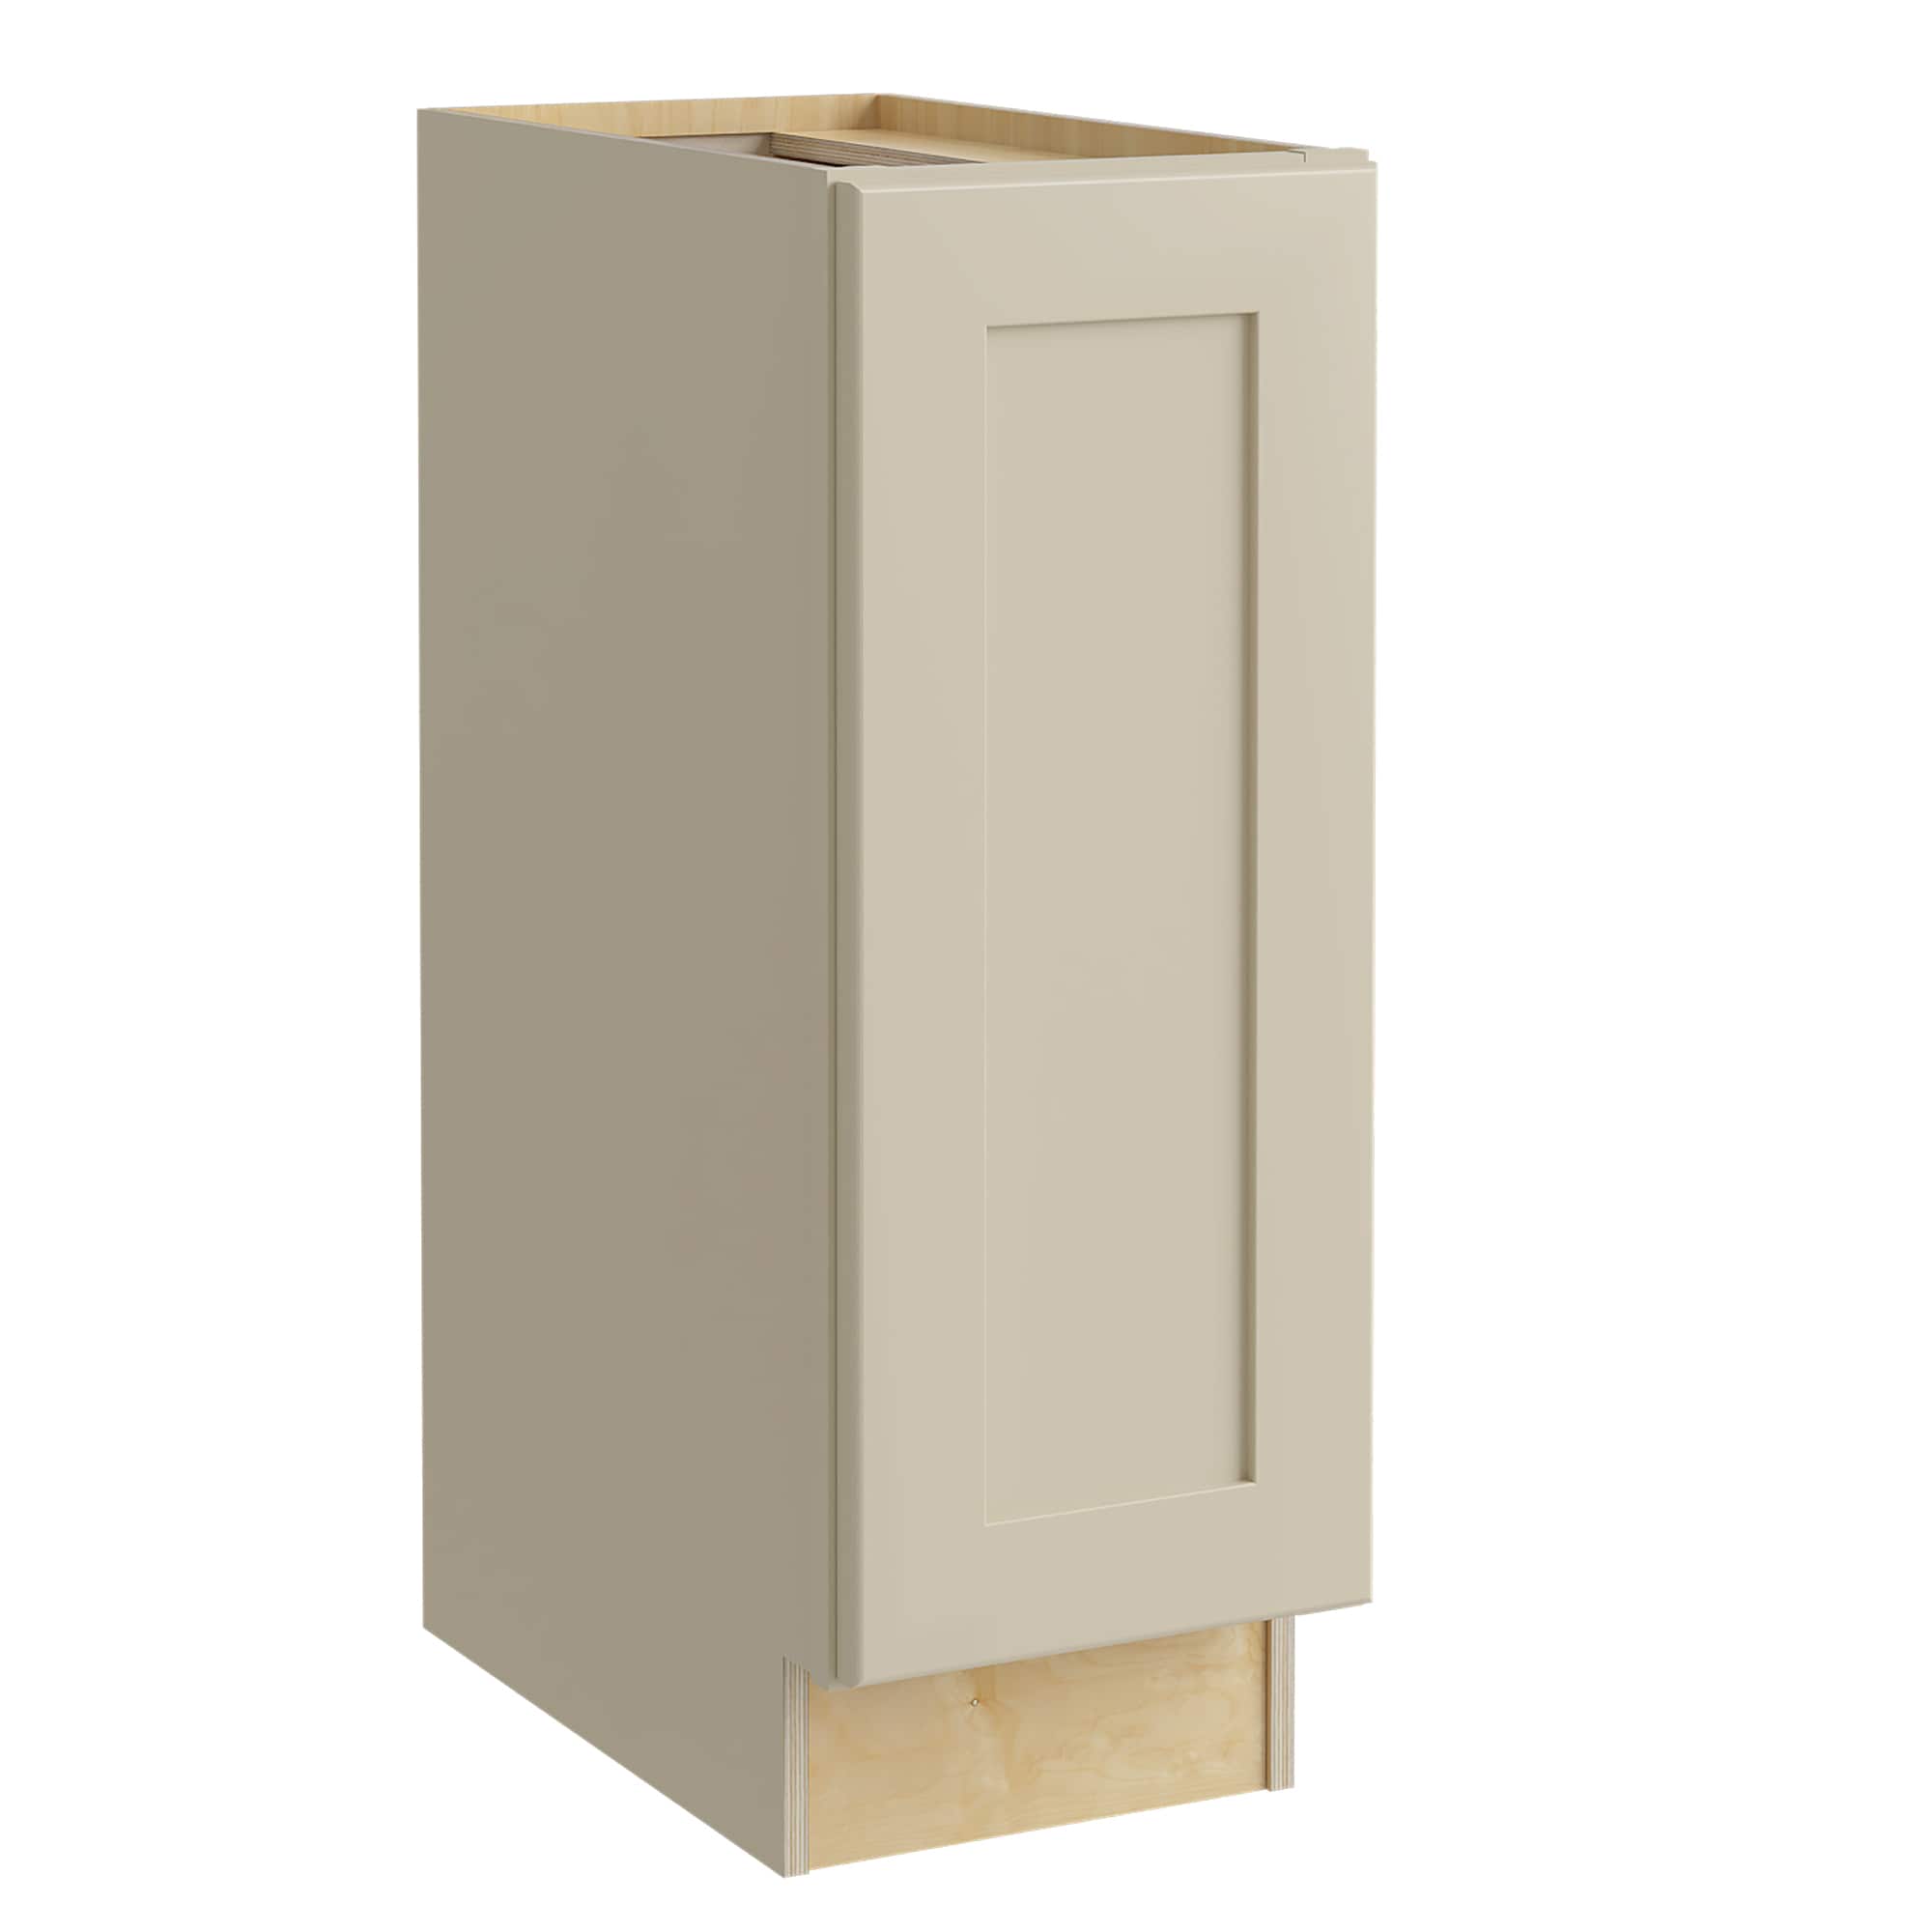 Luxxe Cabinetry 12-in W x 34.5-in H x 24-in D Norfolk Blended Cream Painted Door Base Fully Assembled Semi-custom Cabinet in Off-White | B12FHR-NBC